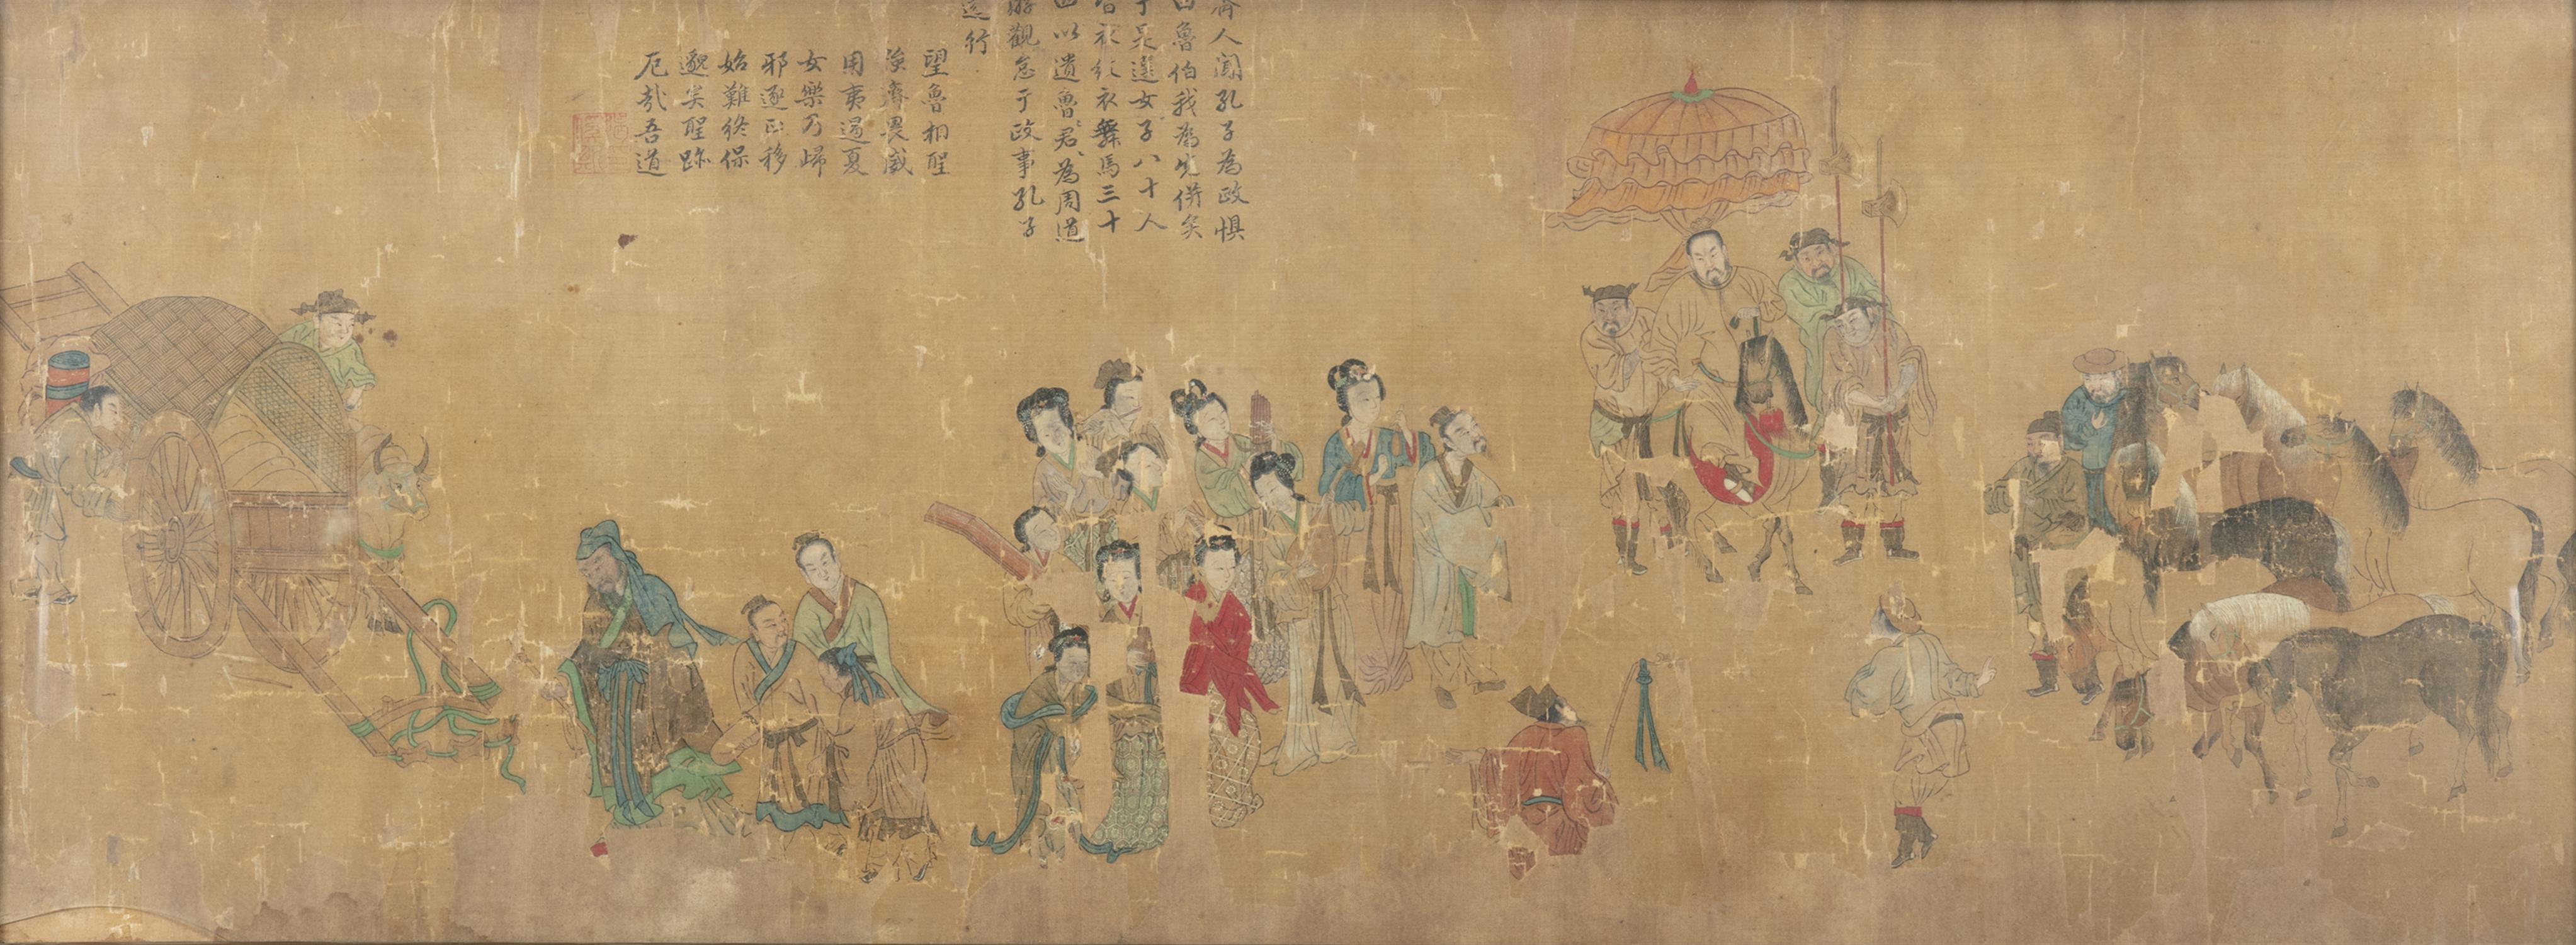 CHINESE SCHOOL, SIGNATURE OF JIE XISI 揭傒斯 (1274-1344) A procession with numerous dignitaries Ink and - Image 9 of 10